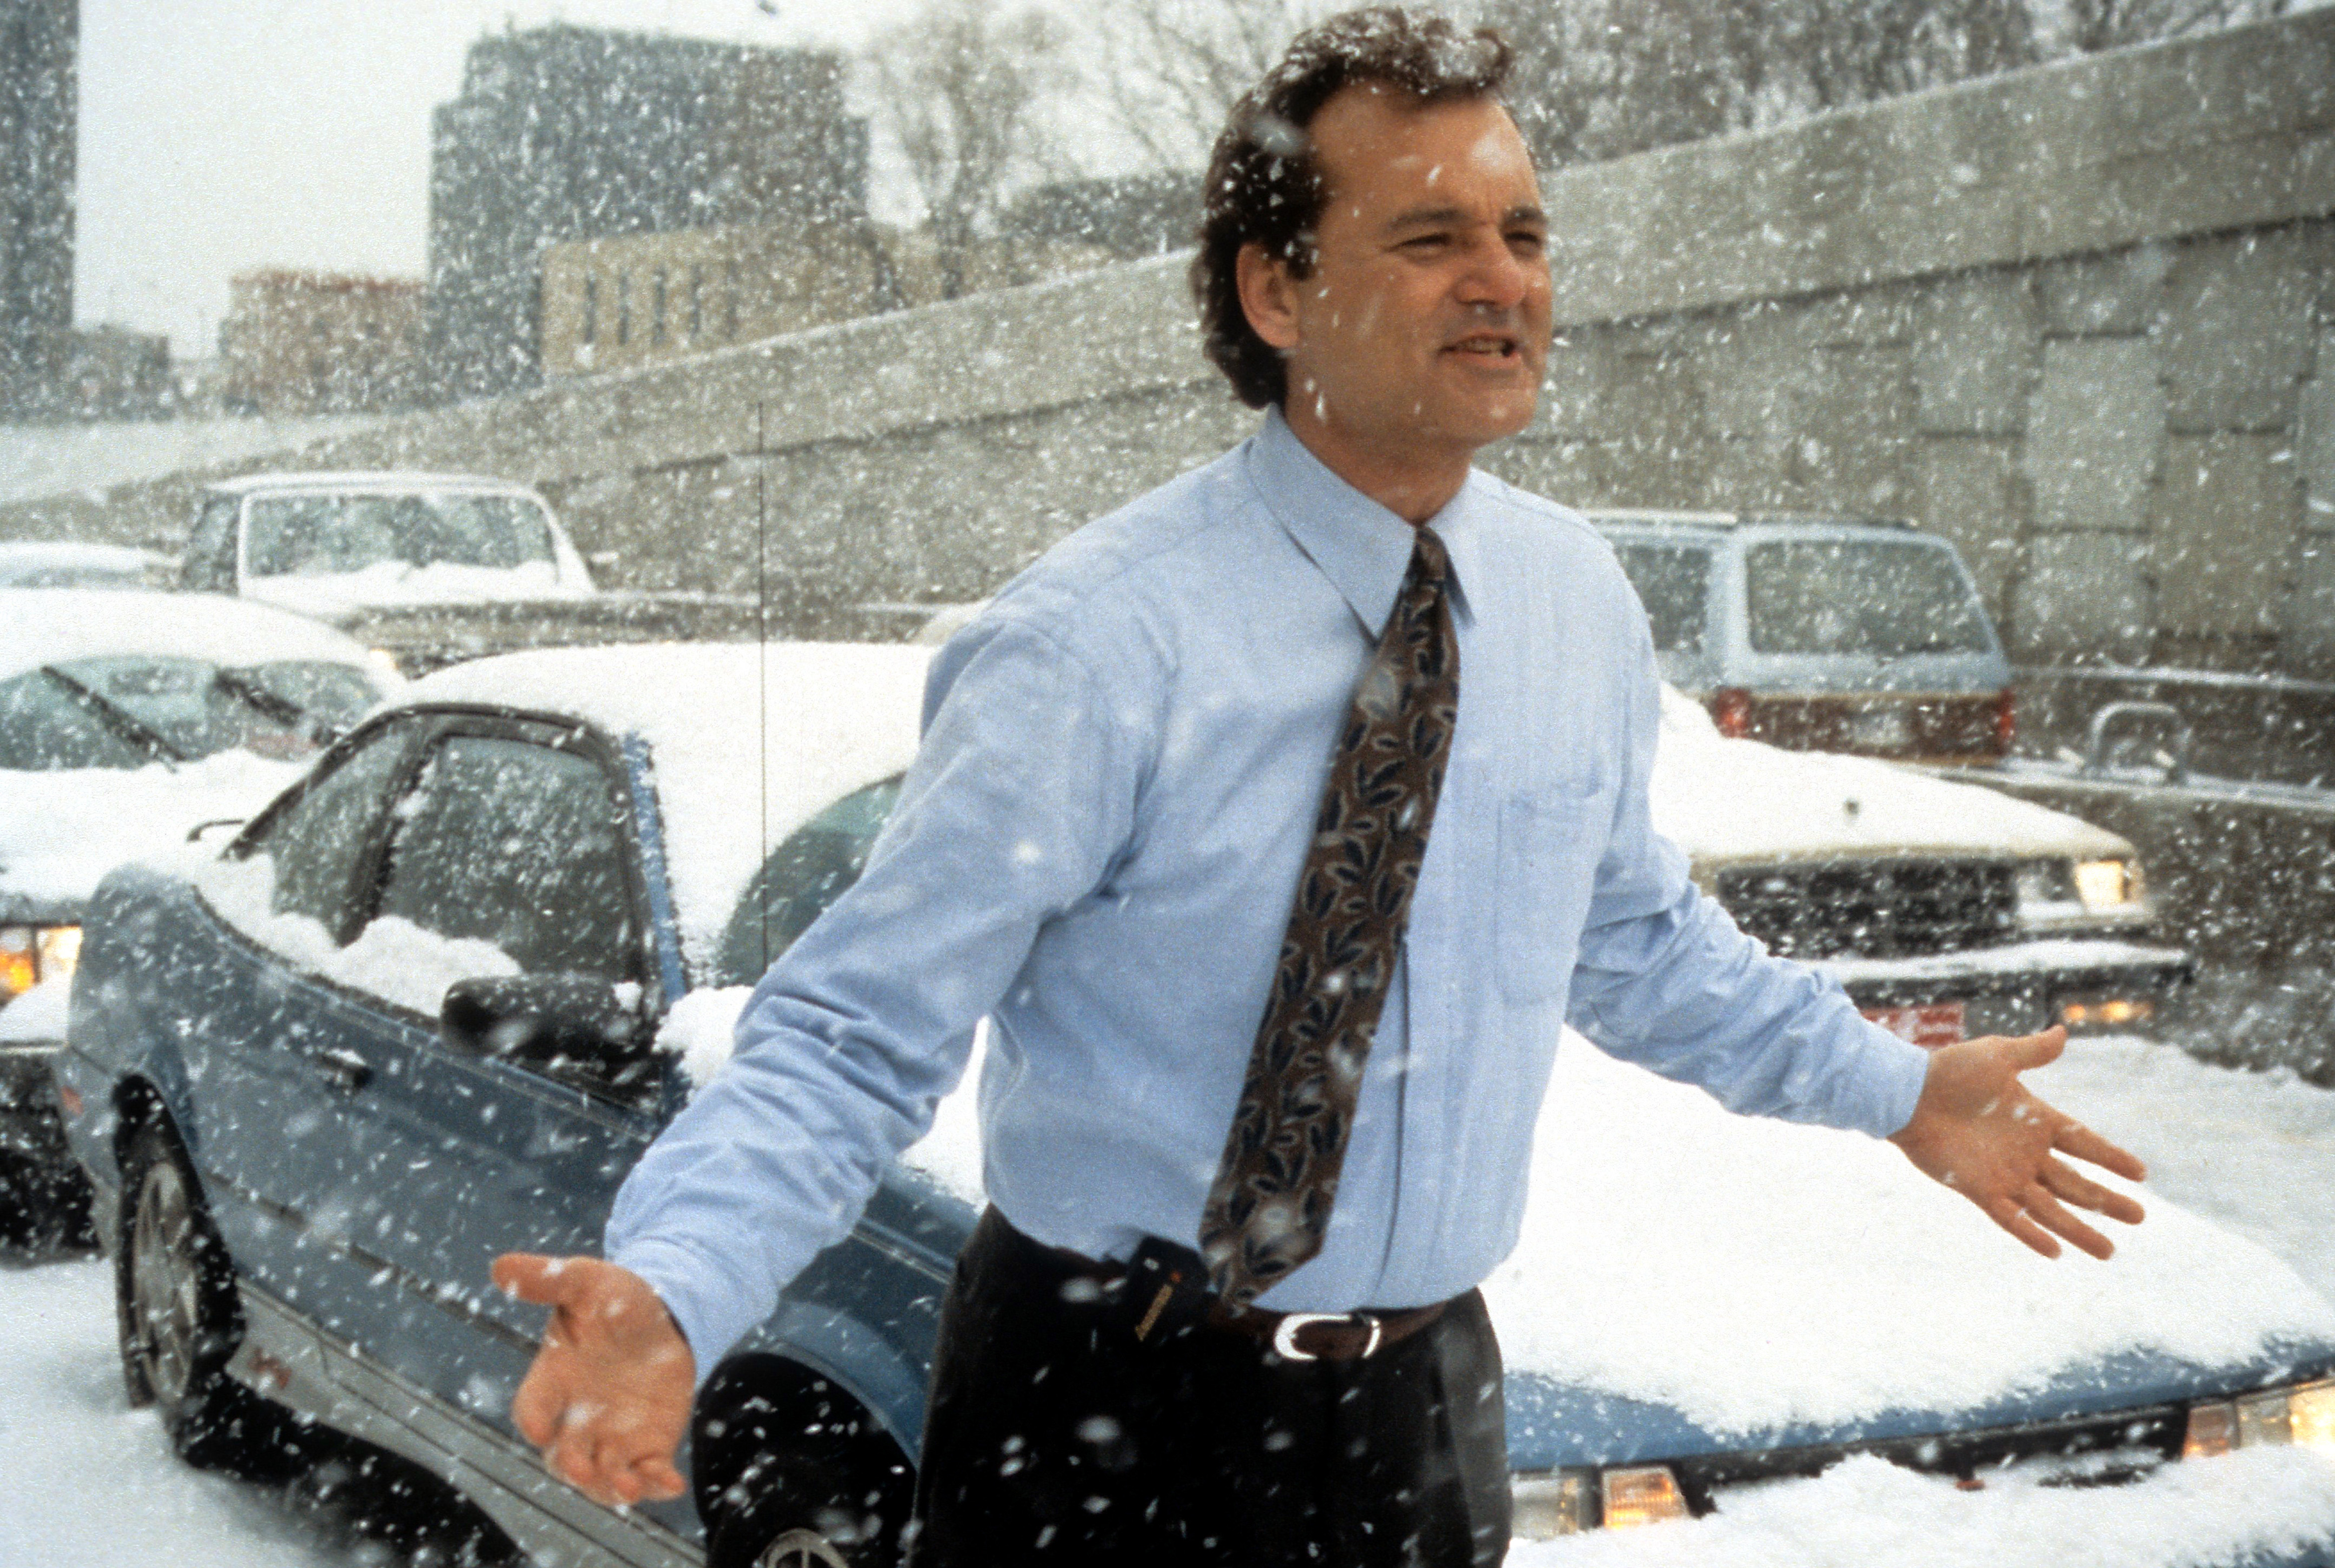 Bill Murray runs through the snow in a scene from the film 'Groundhog Day', 1993 | Source: Getty Images